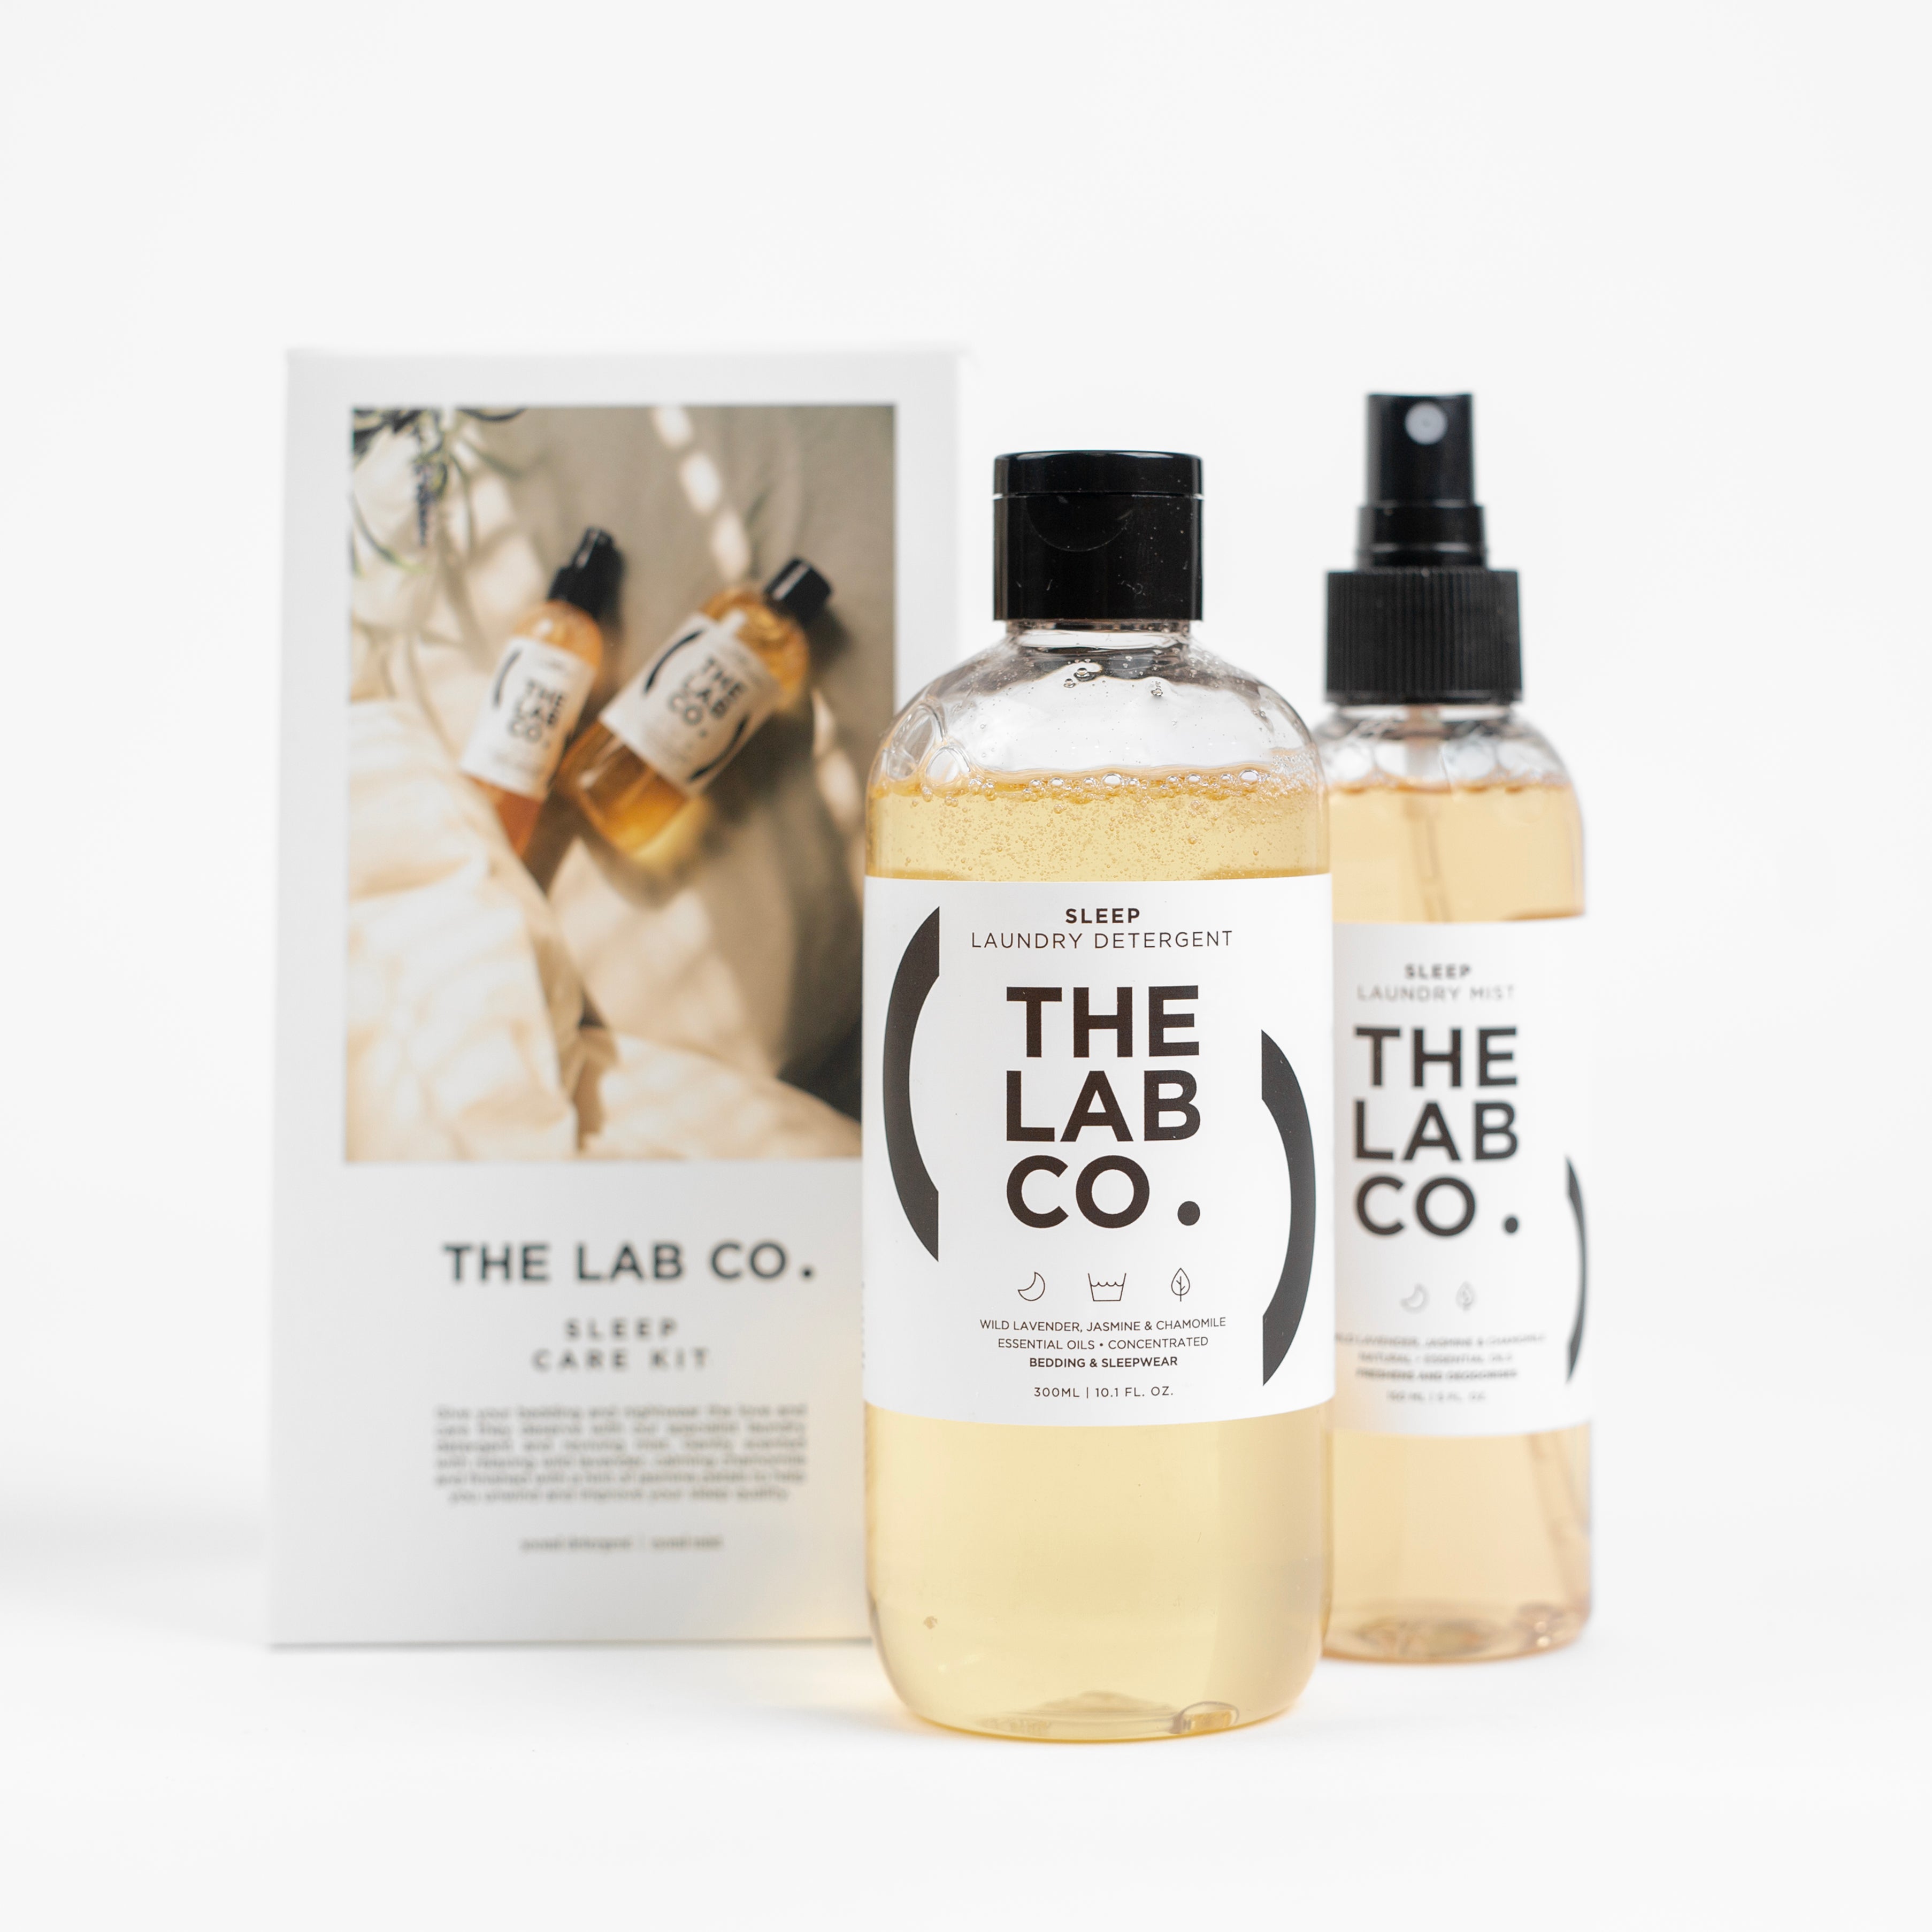 Laundry Detergent & Mist for Washing Bed Linen - The Lab Co.